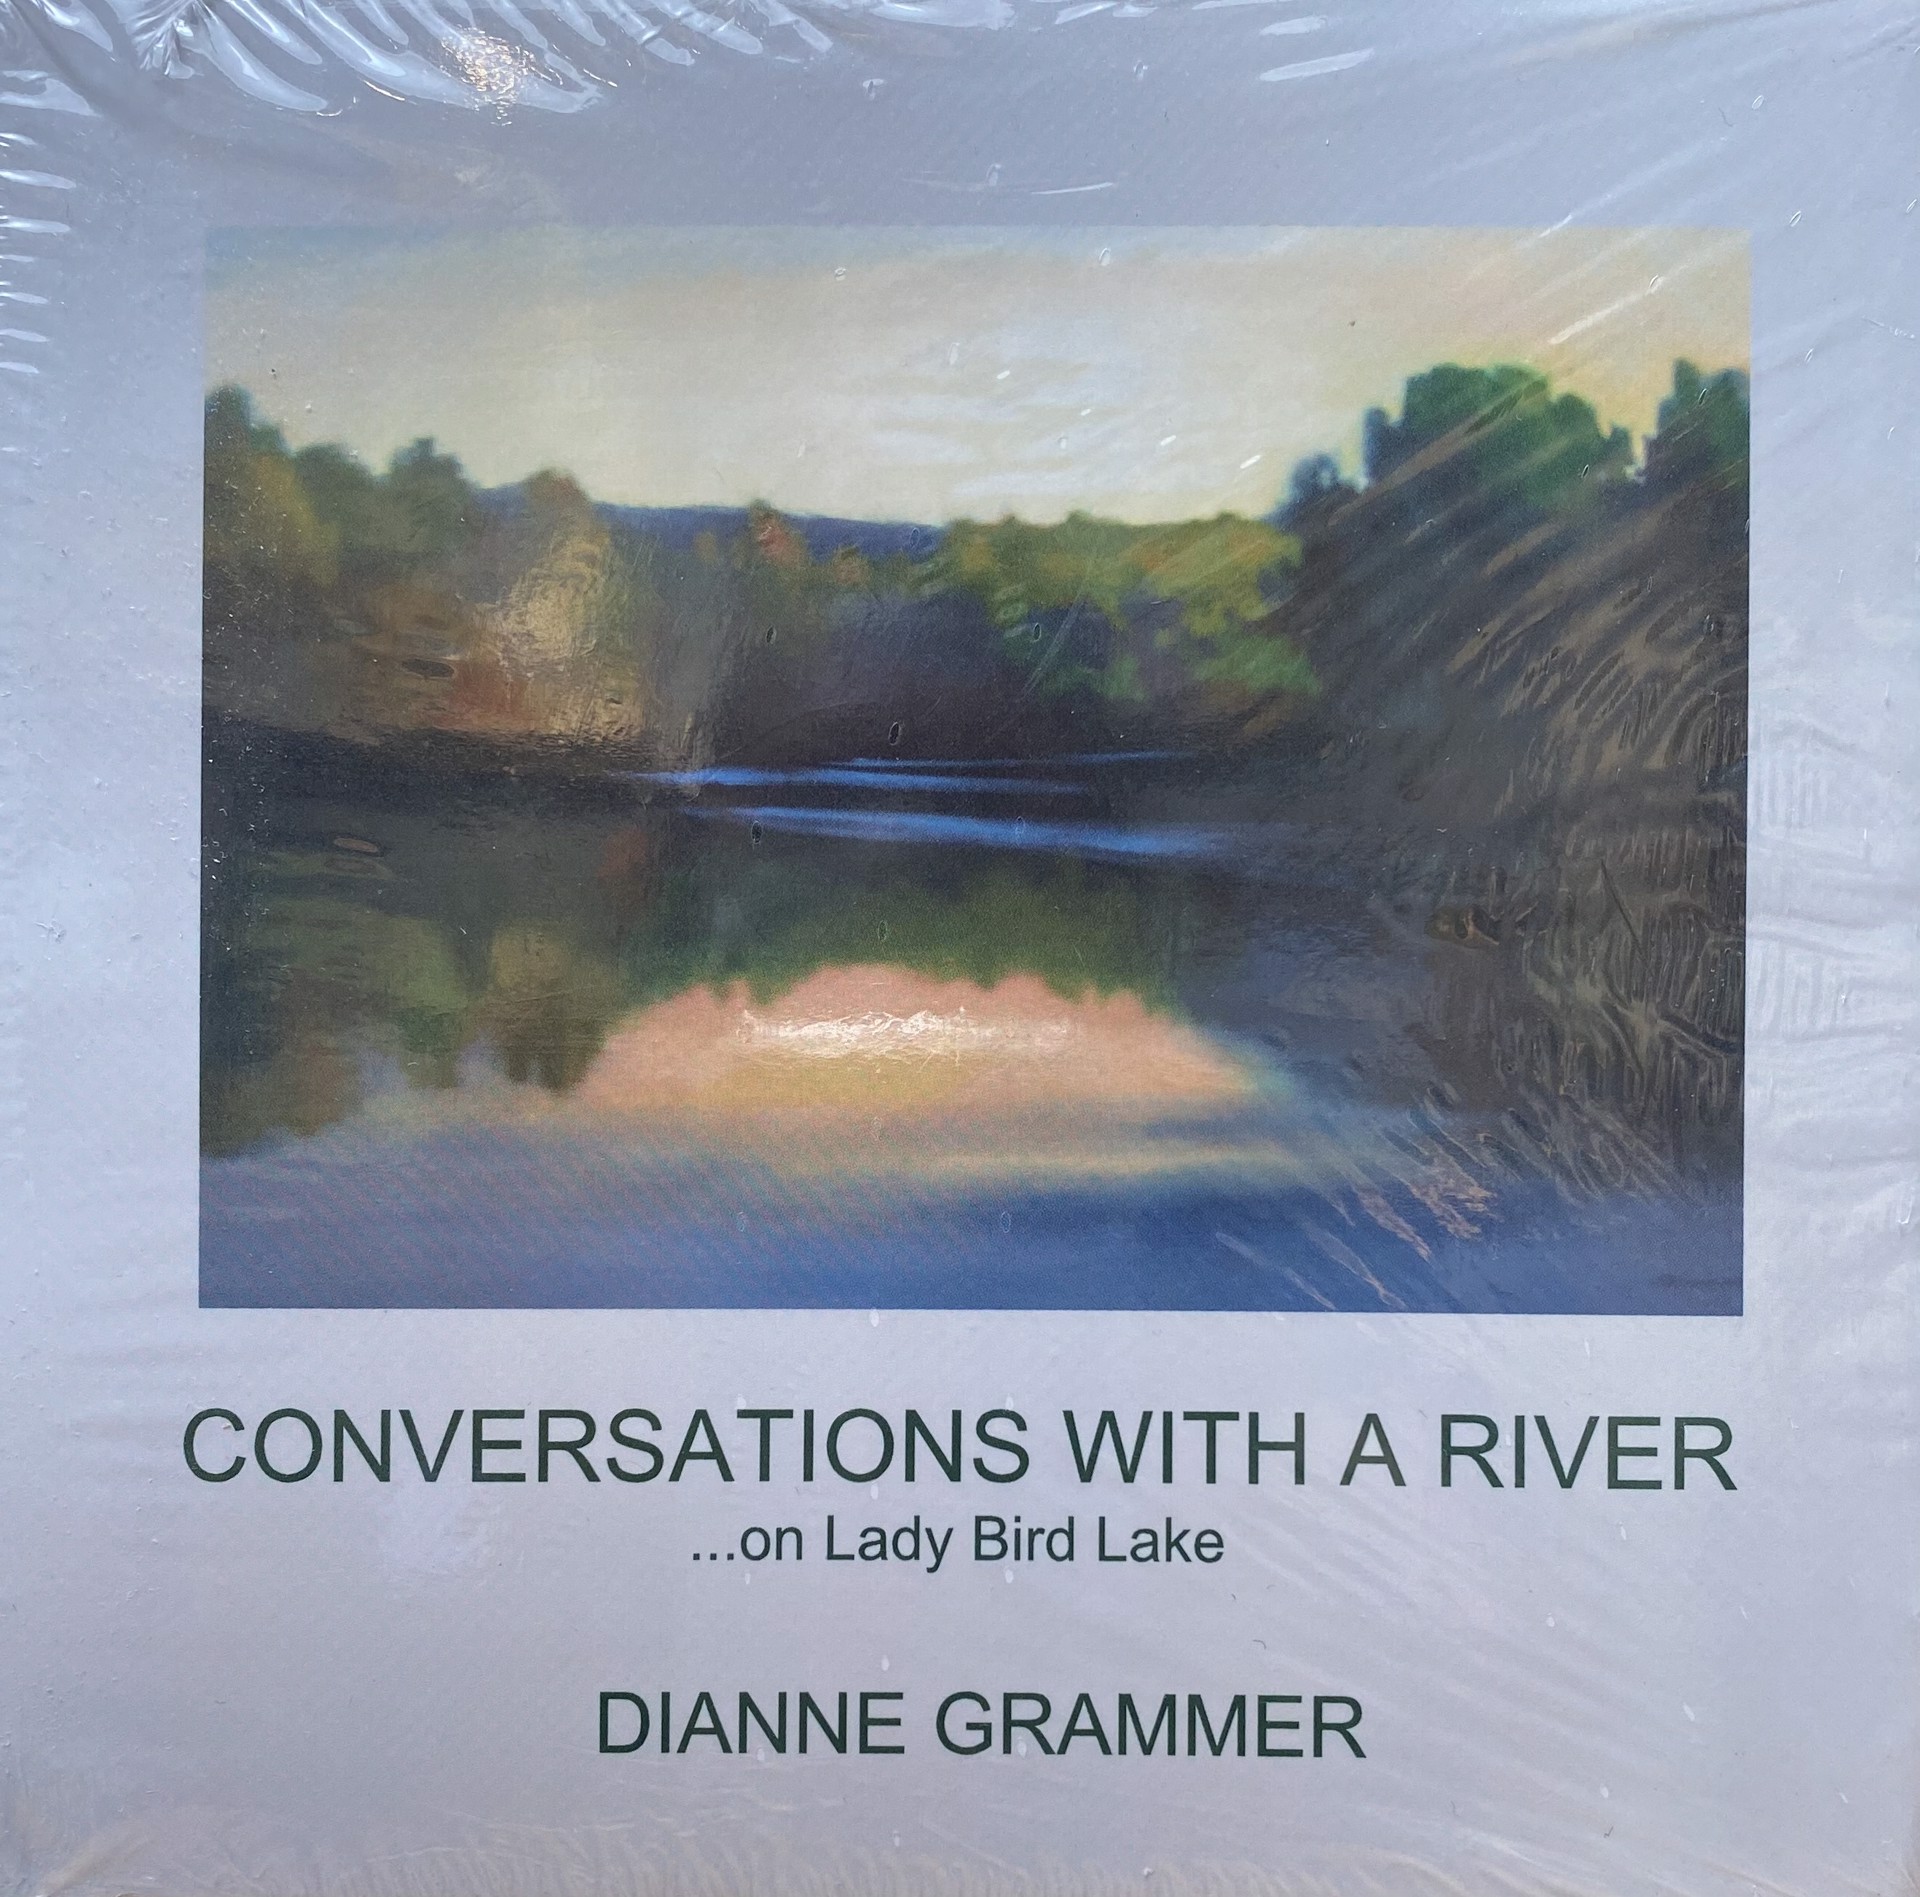 Dianne Grammer: Conversations with a River... (HC; 17/18) by Dianne Grammer